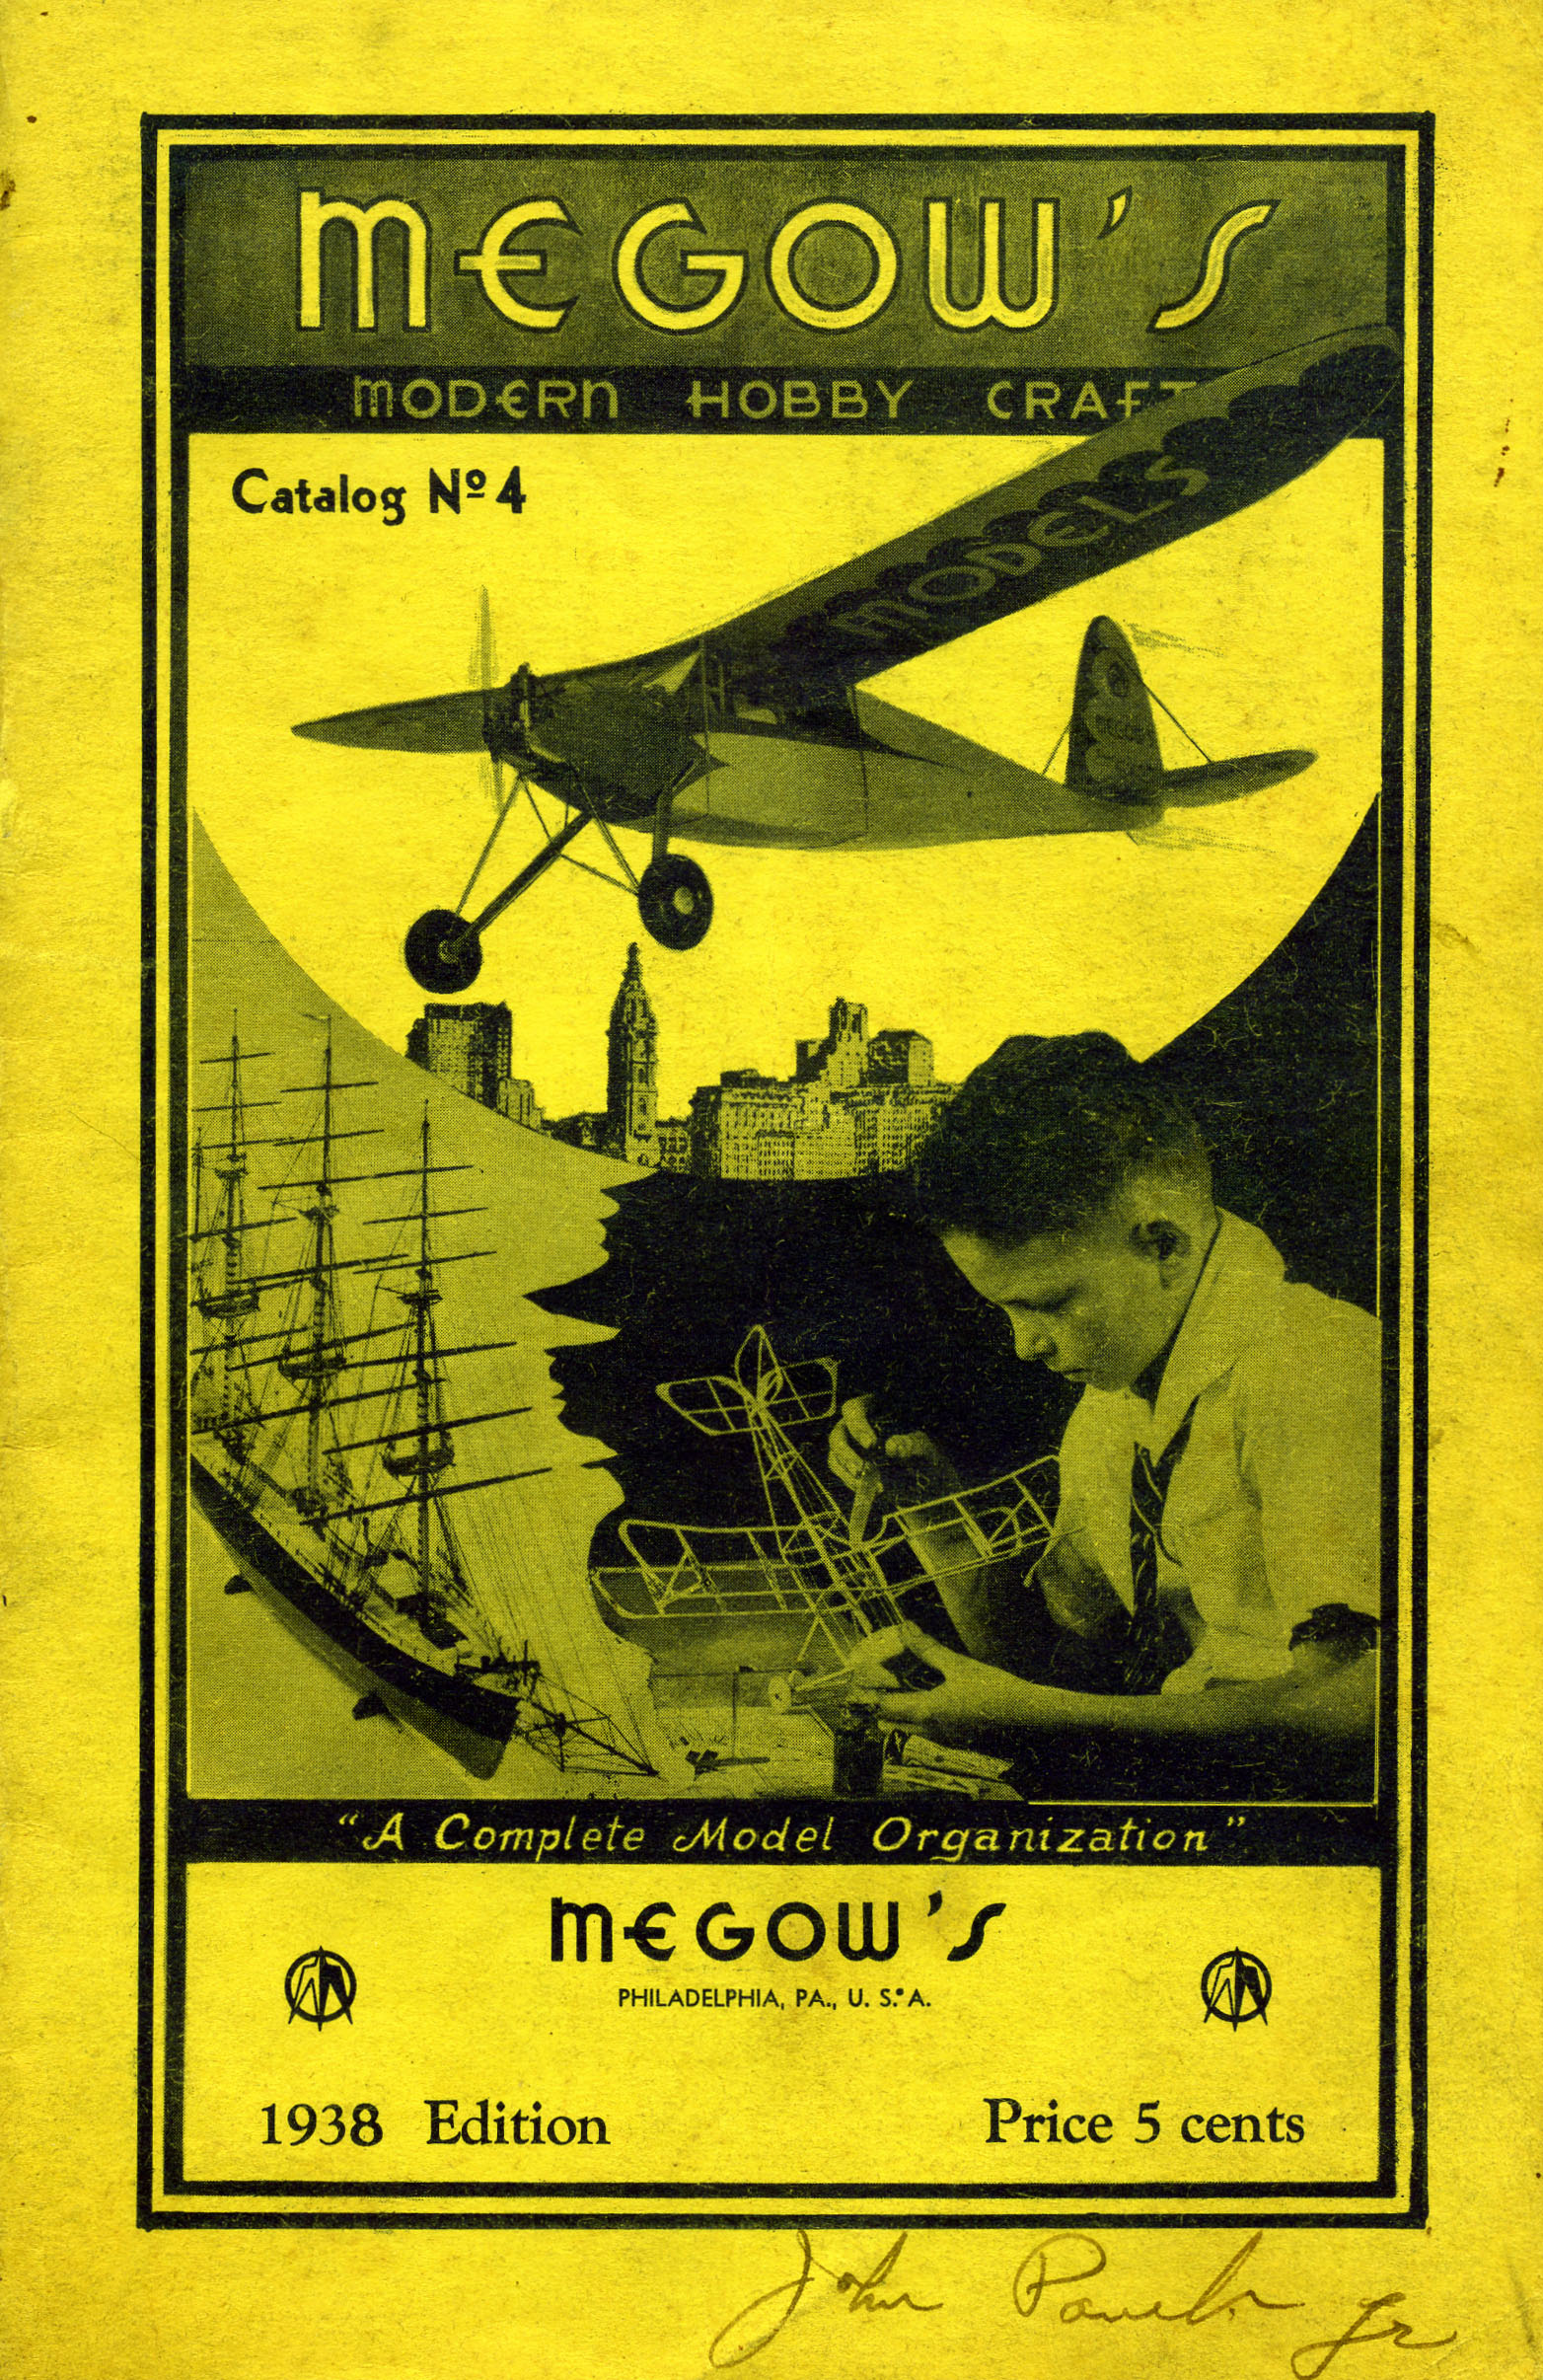 Catalog, Megow's Modern Hobby Craft, 1938. (Source: National Model Aviation Museum Archives, Manufacturers and Companies Collection #0043)